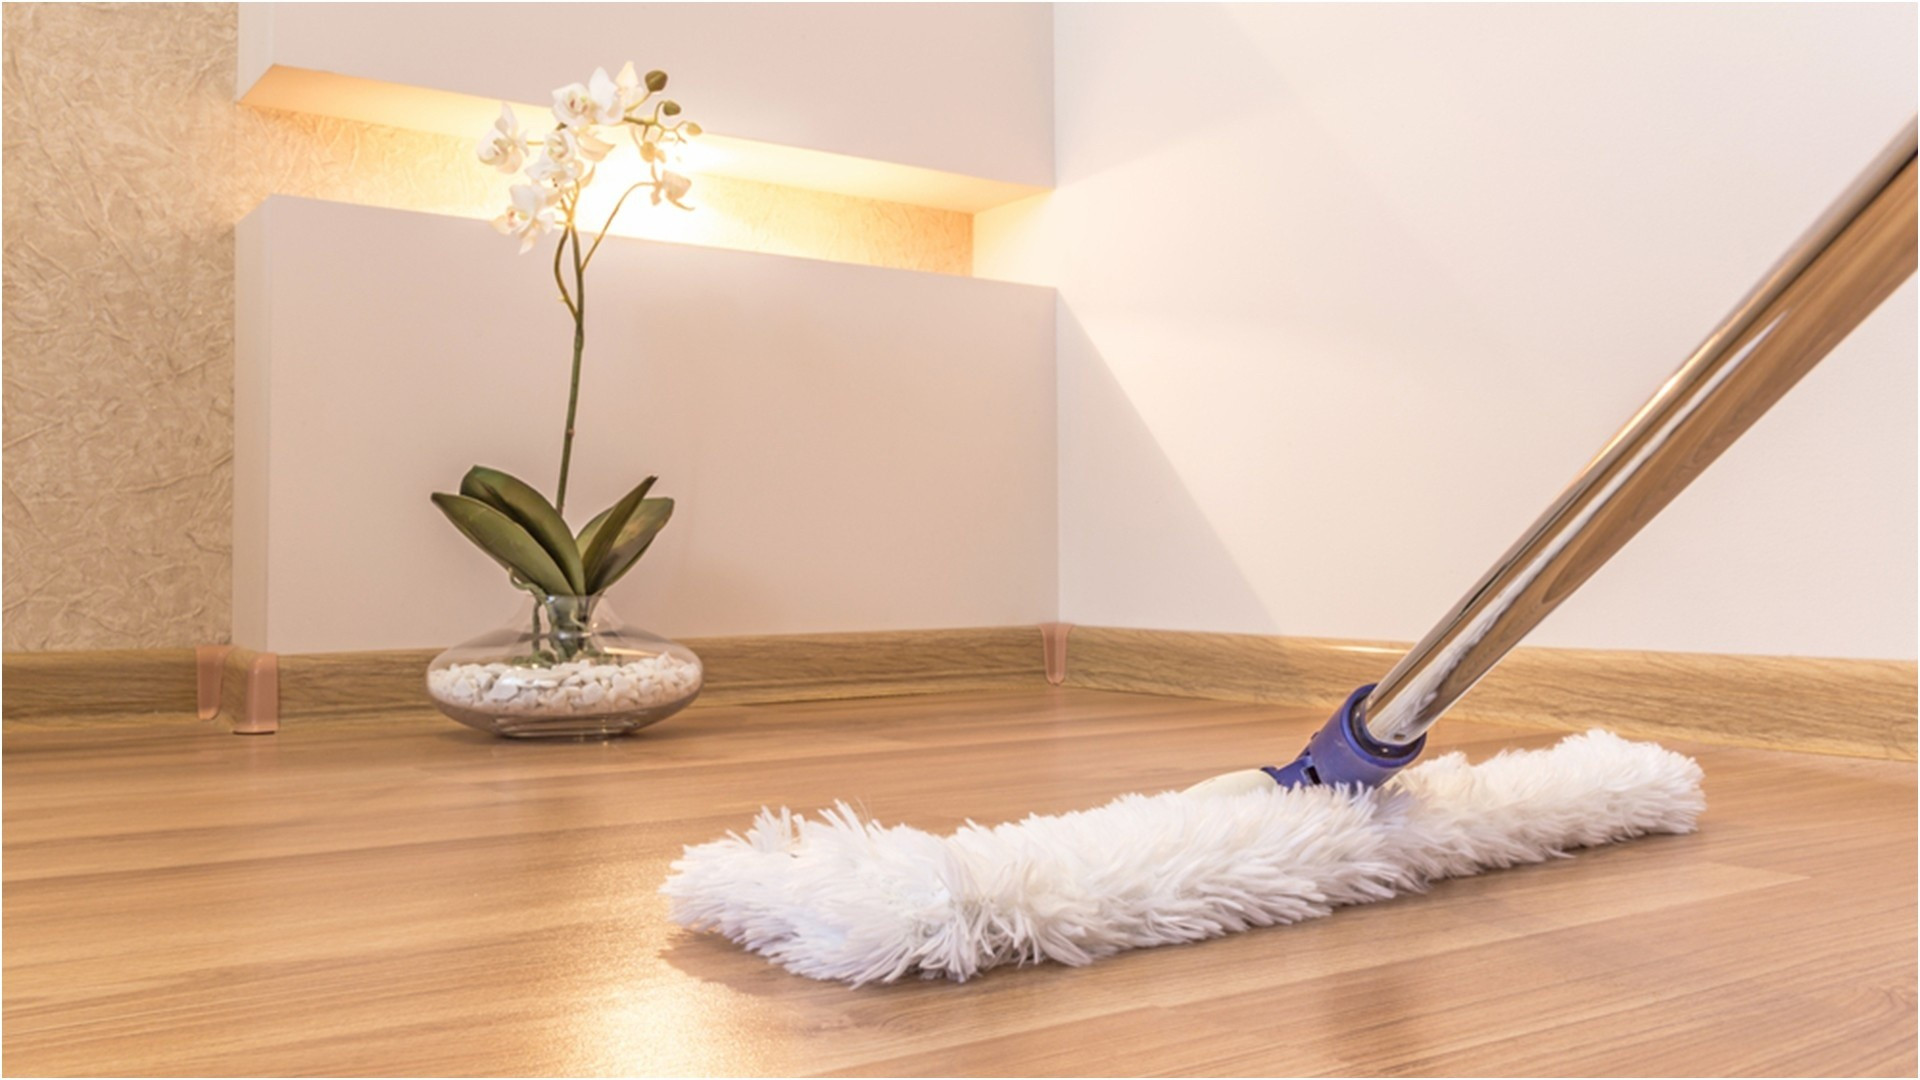 hardwood floor cleaning solution of 17 awesome what to use to clean hardwood floors image dizpos com intended for what to use to clean hardwood floors inspirational how much laminate flooring do i need luxury